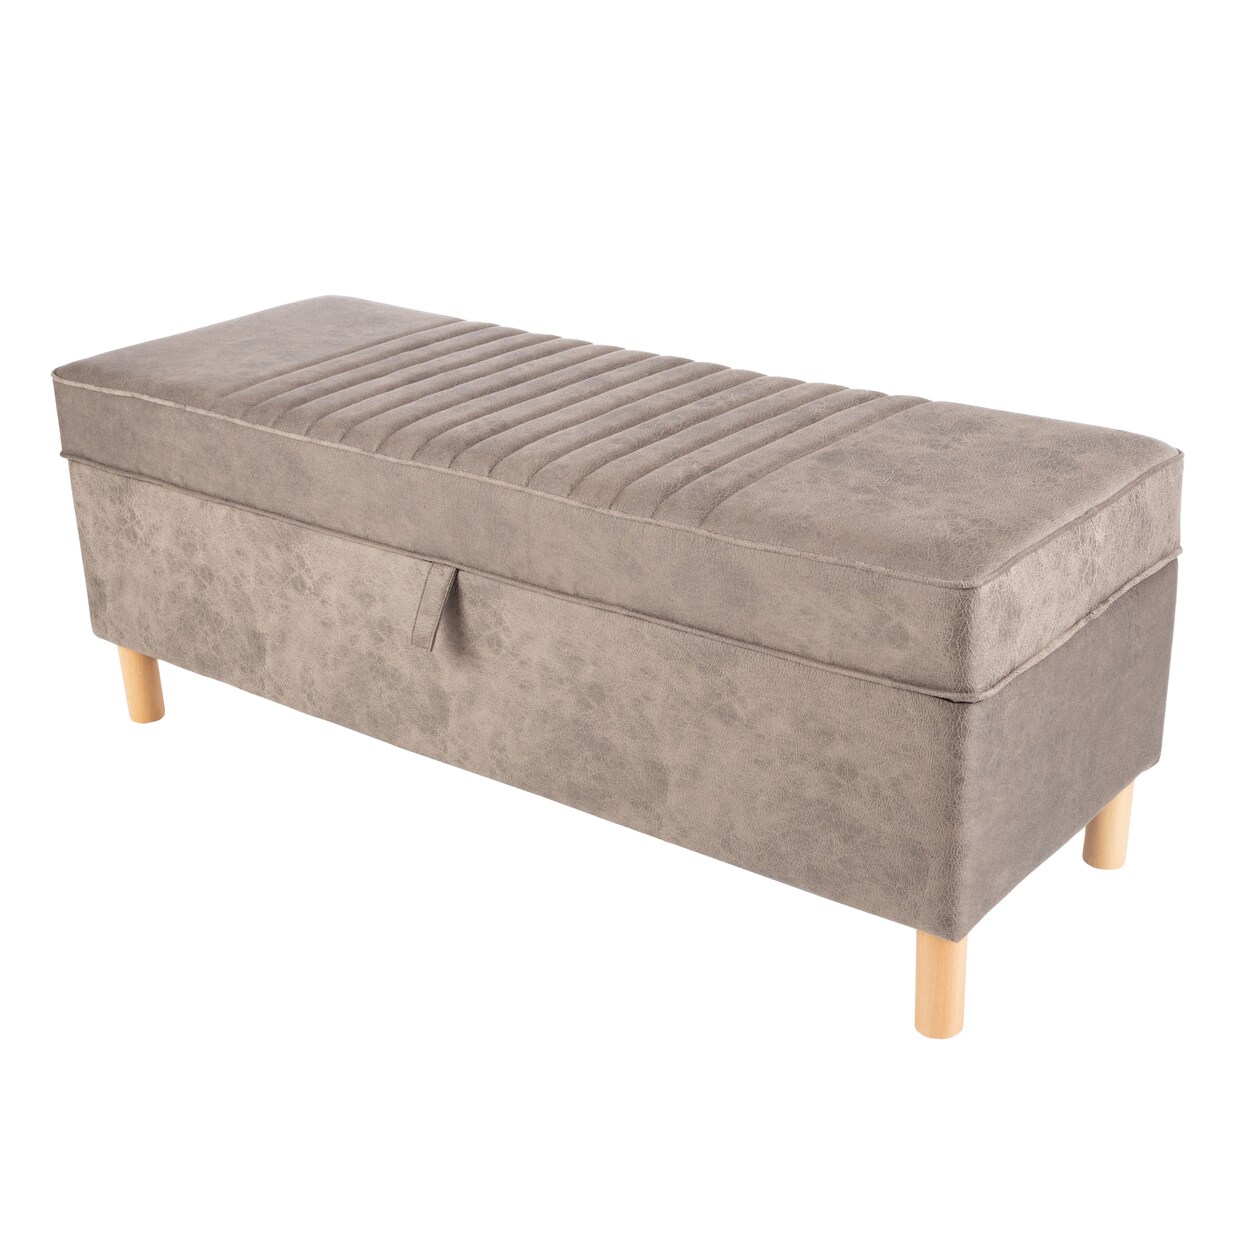 Lavish Home Storage Ottoman Footrest Suede Upholstered Linen Chest Bedroom 15.7 In Tall